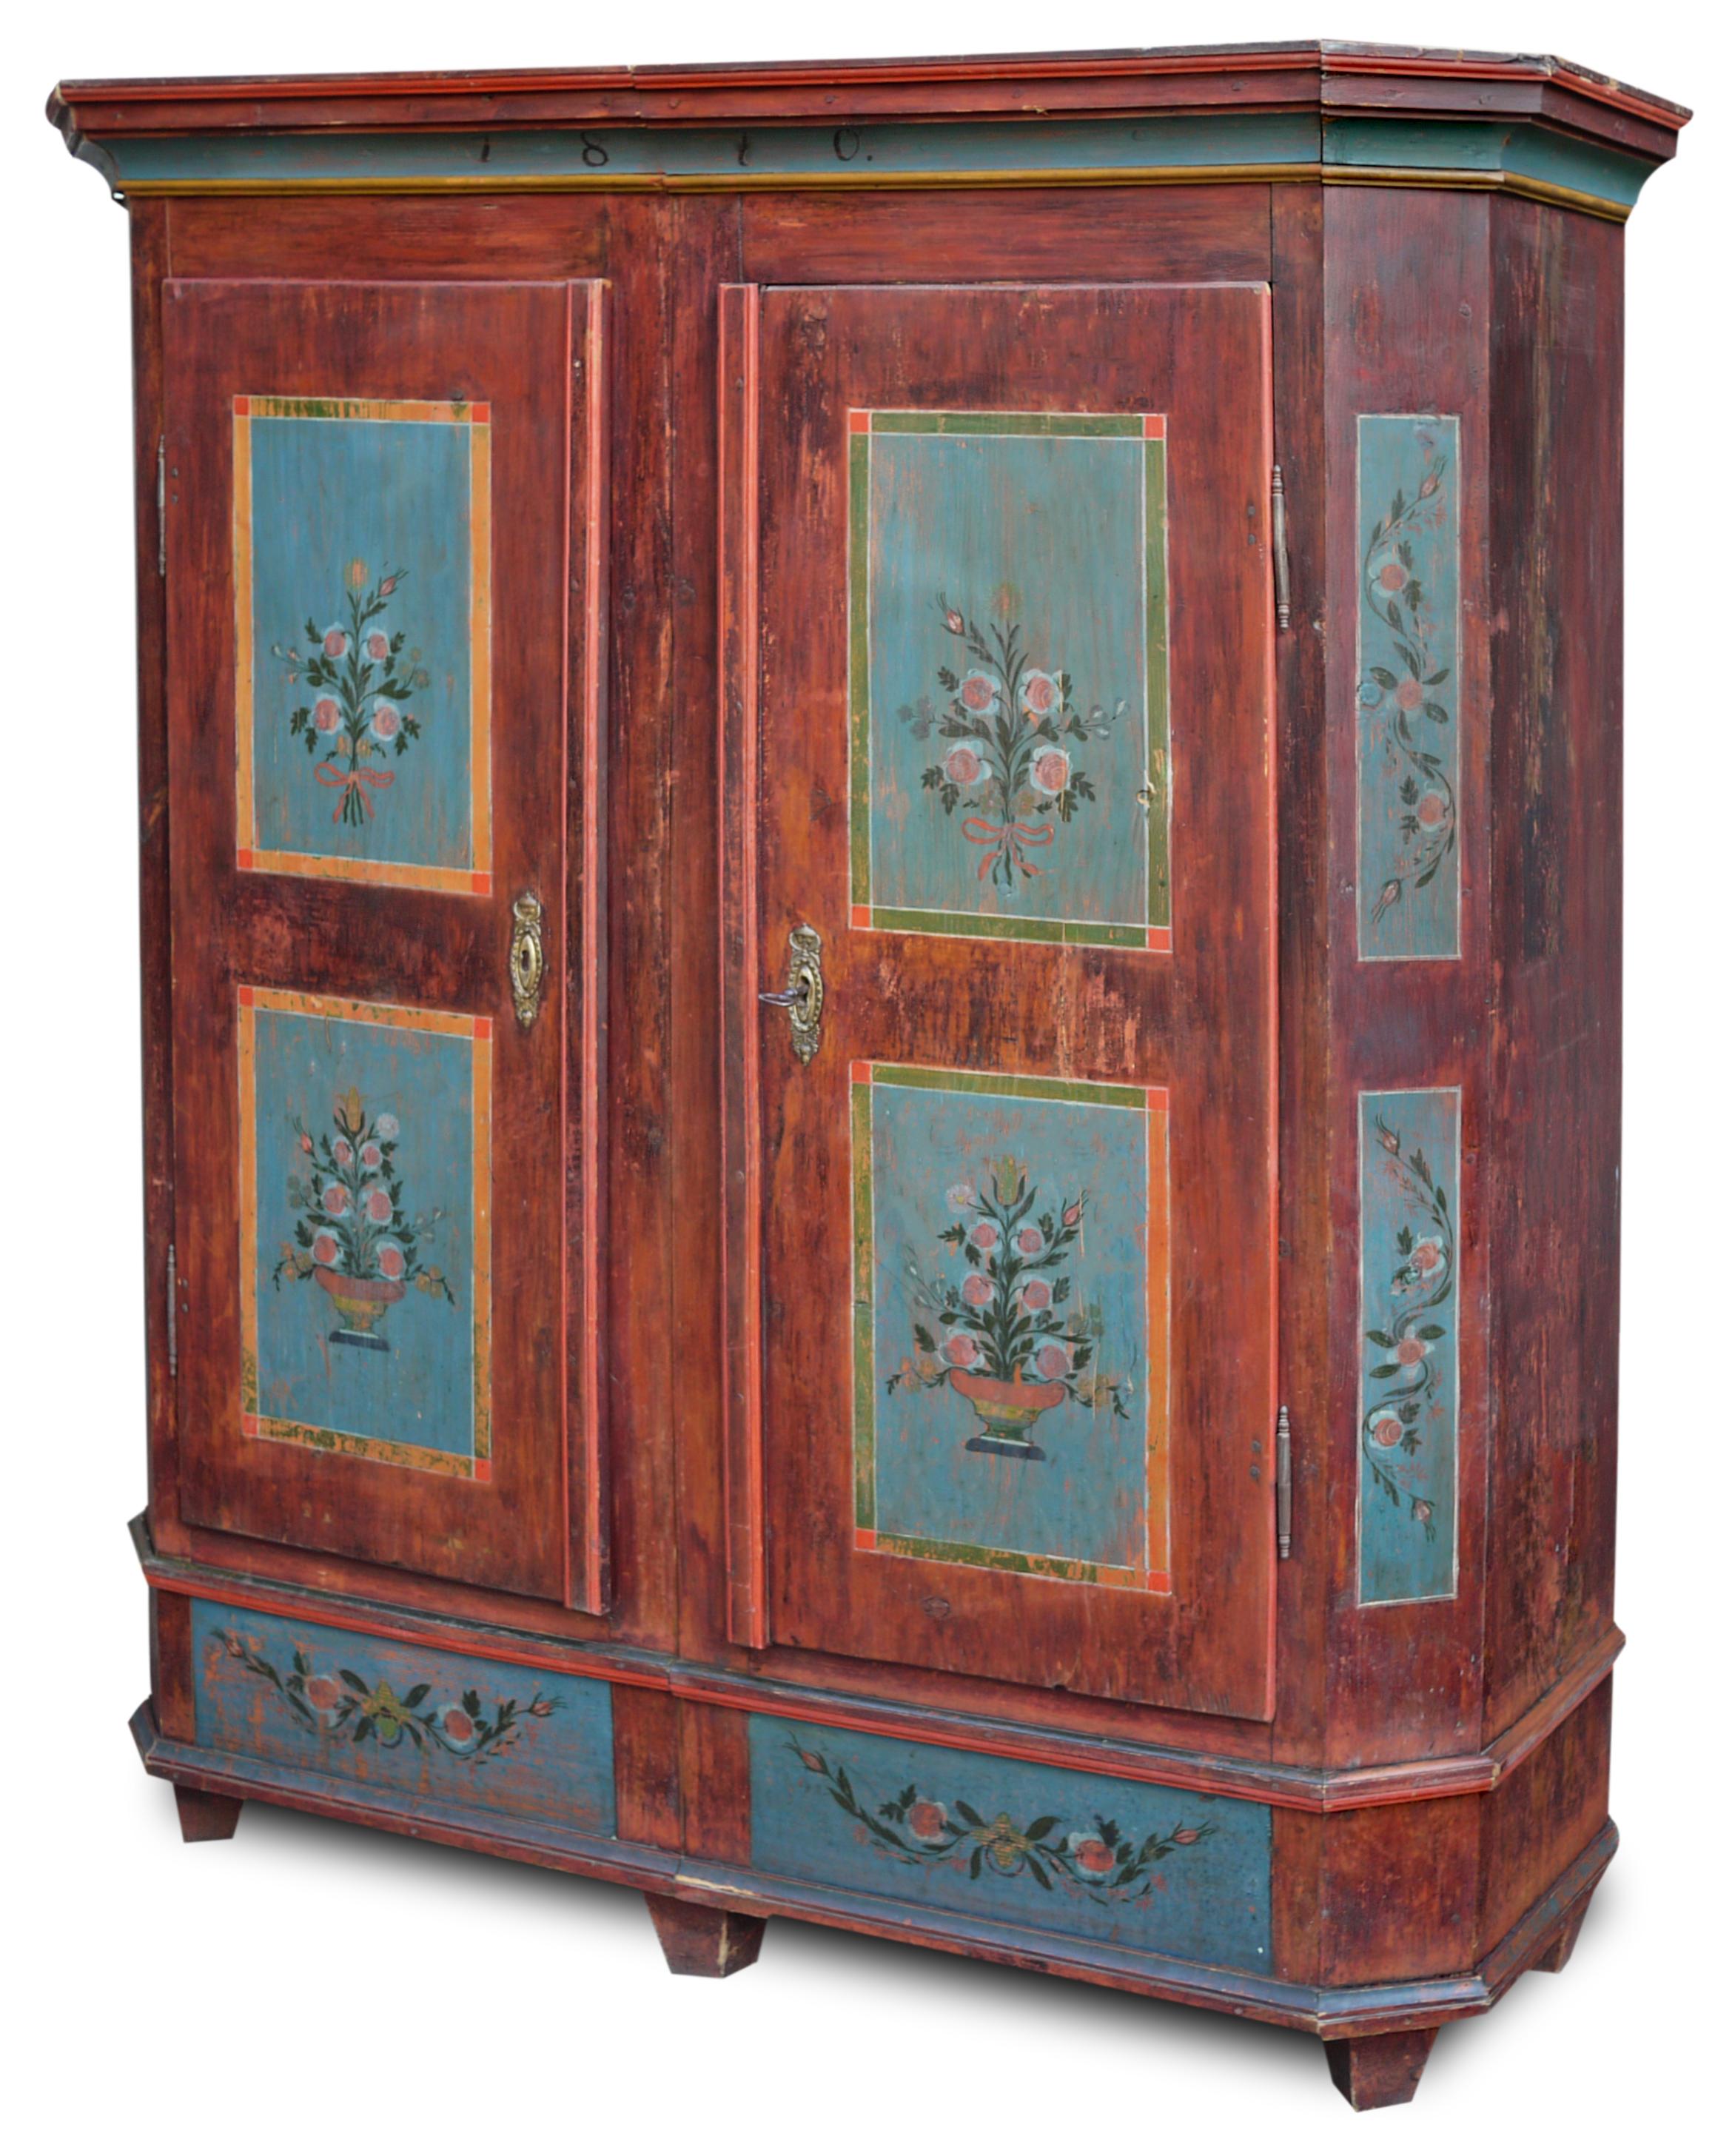 Red Tyrolean wardrobe with flowers

Measures: H. 188 cm, W. 165 cm, D. 57 cm

Tyrolean notched wardrobe with two doors, painted with a red background.

On the doors, on the lower cornice and on the notches are painted blue backgrounds decorated with